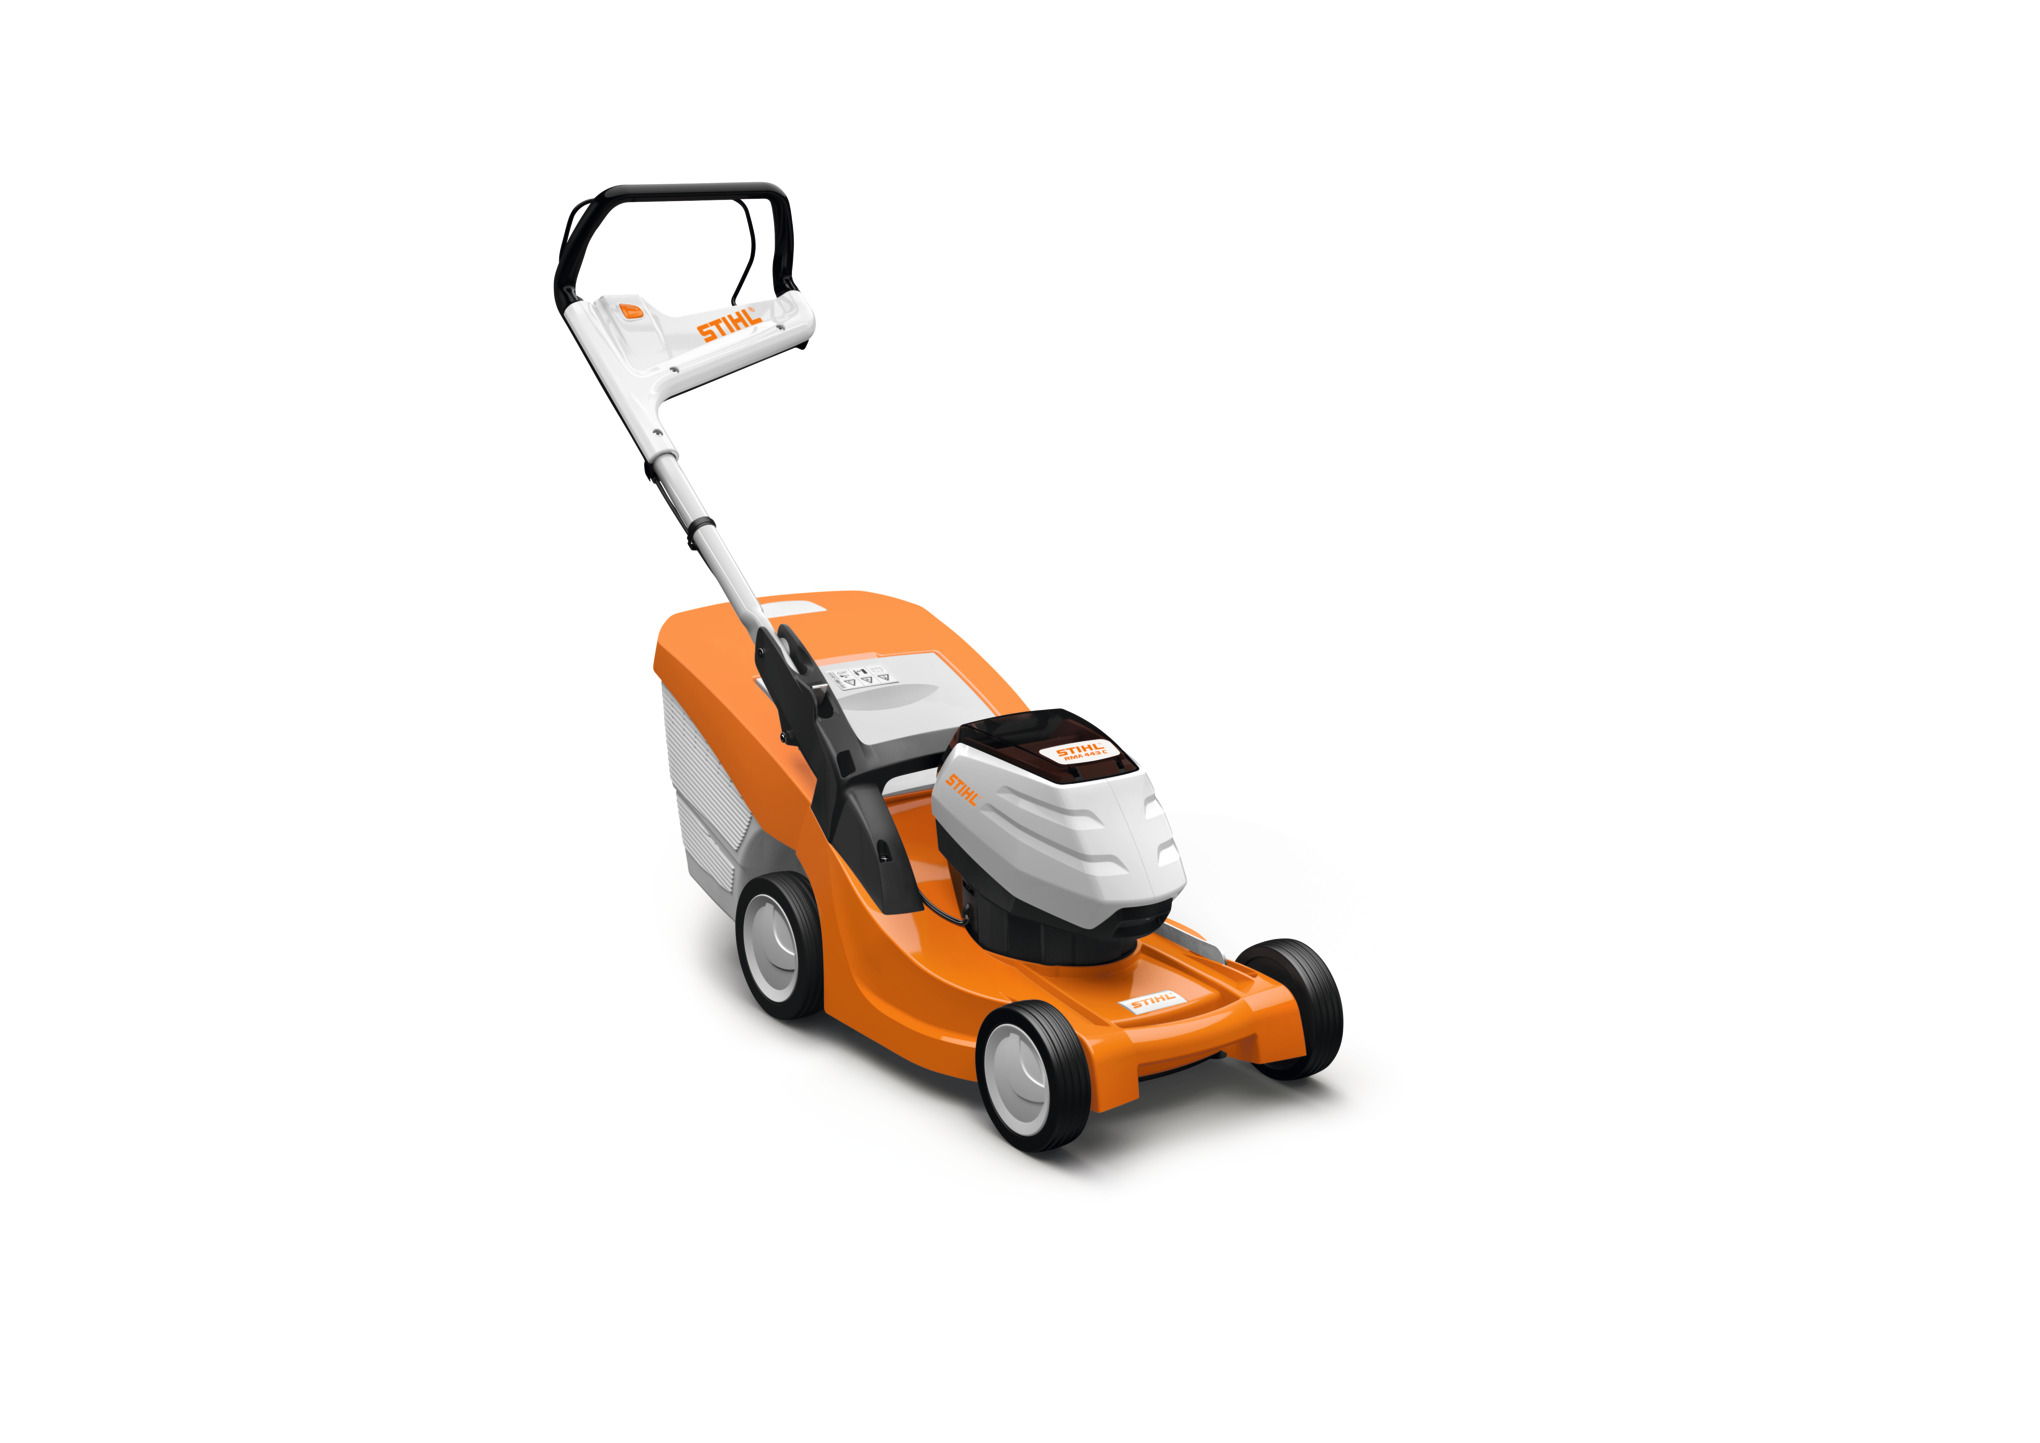 STIHL RMA 443 C cordless lawn mower from the AP-System